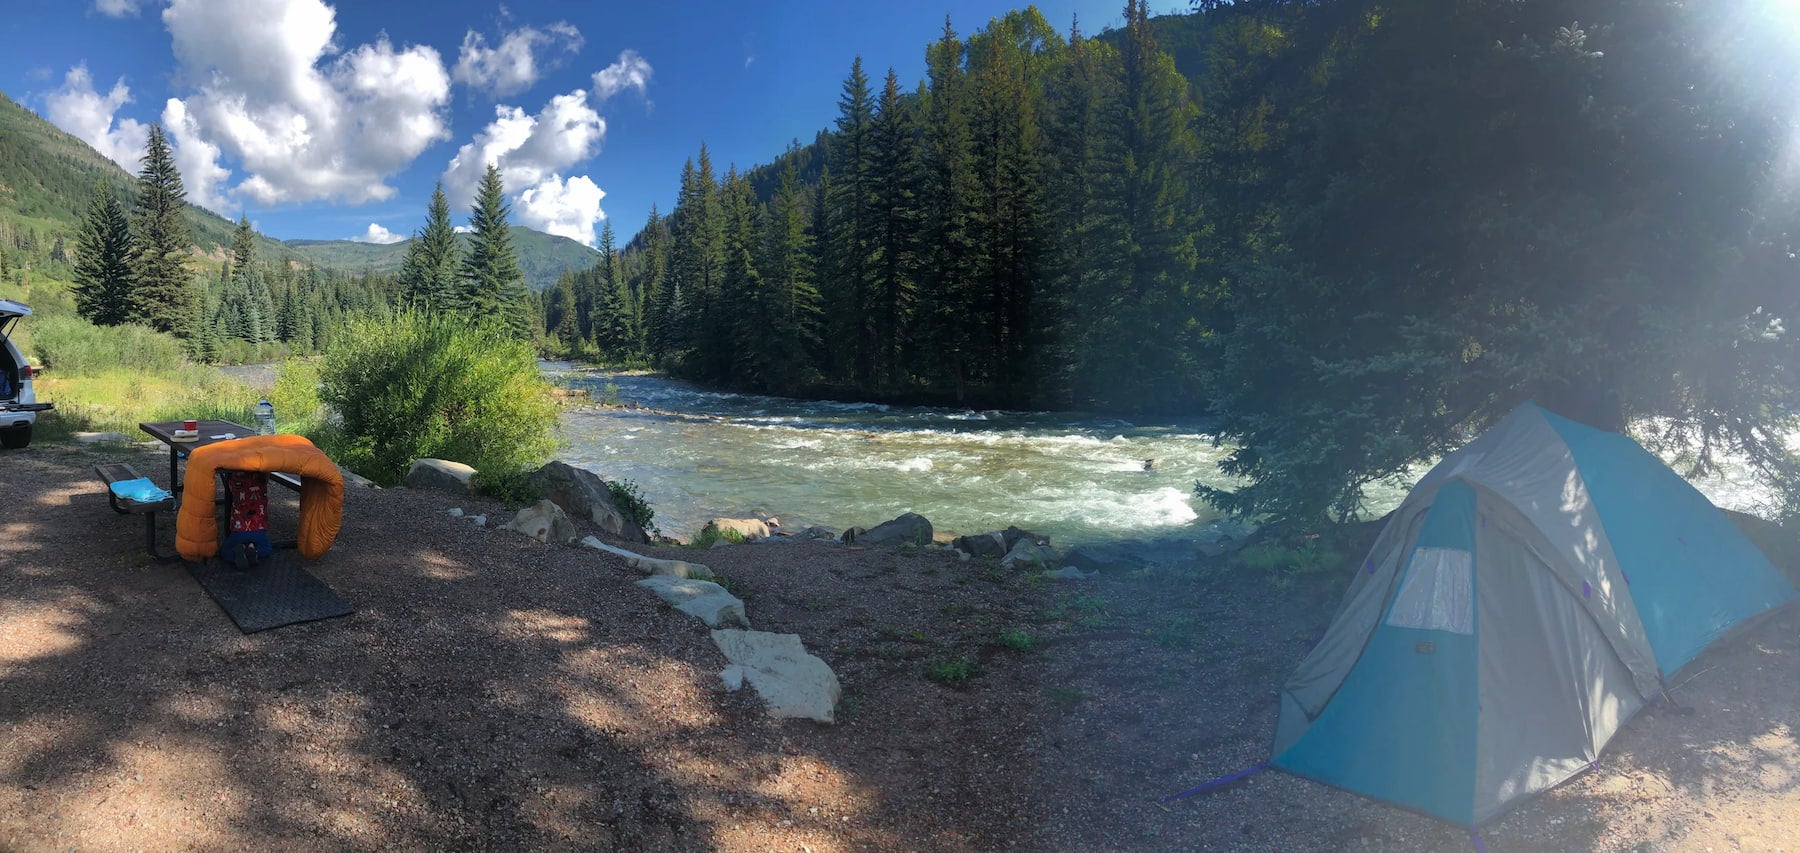 Panoramic view of campsite along flowing river with tent and picnic table.